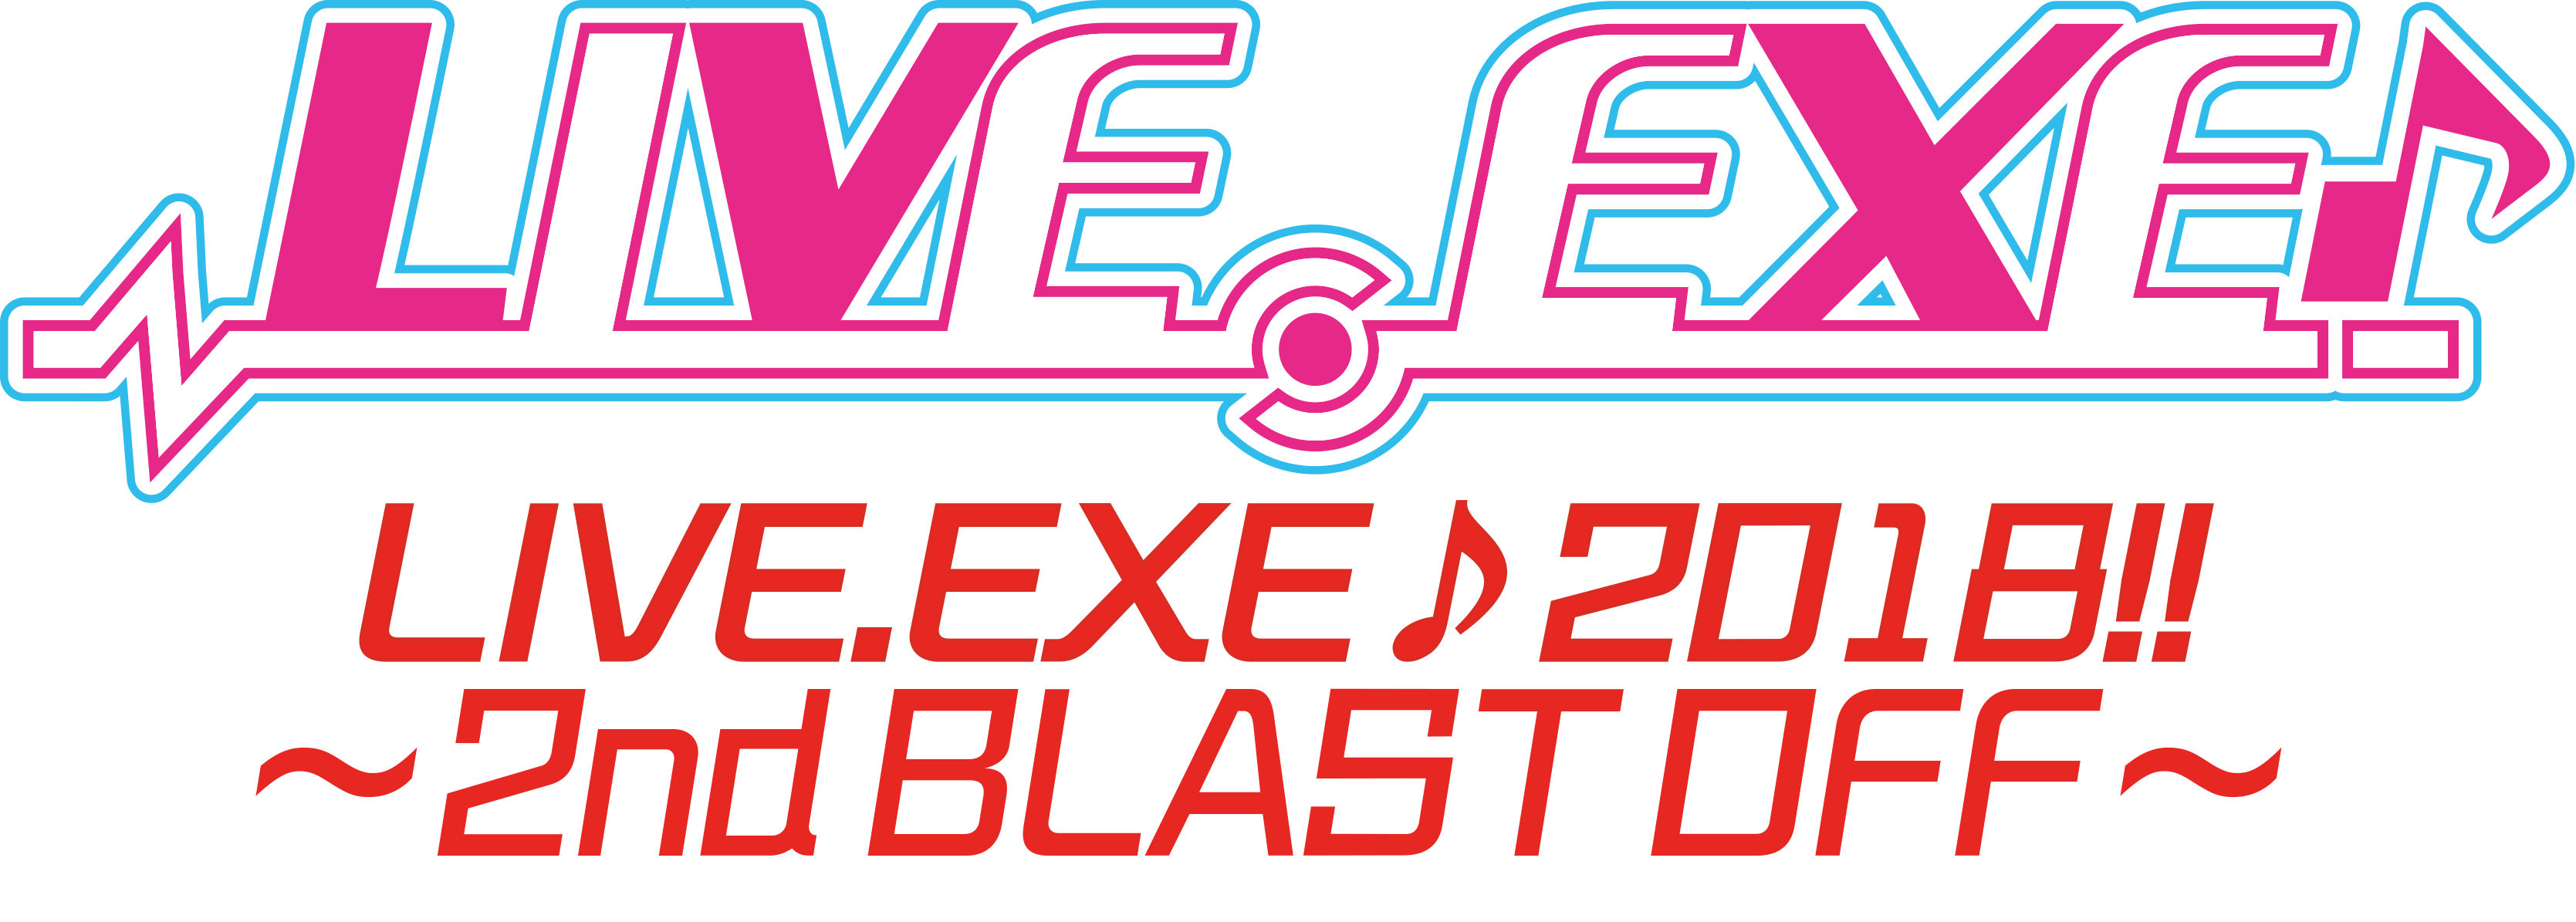 LIVE.EXE♪2018!!～2nd BLAST OFF～